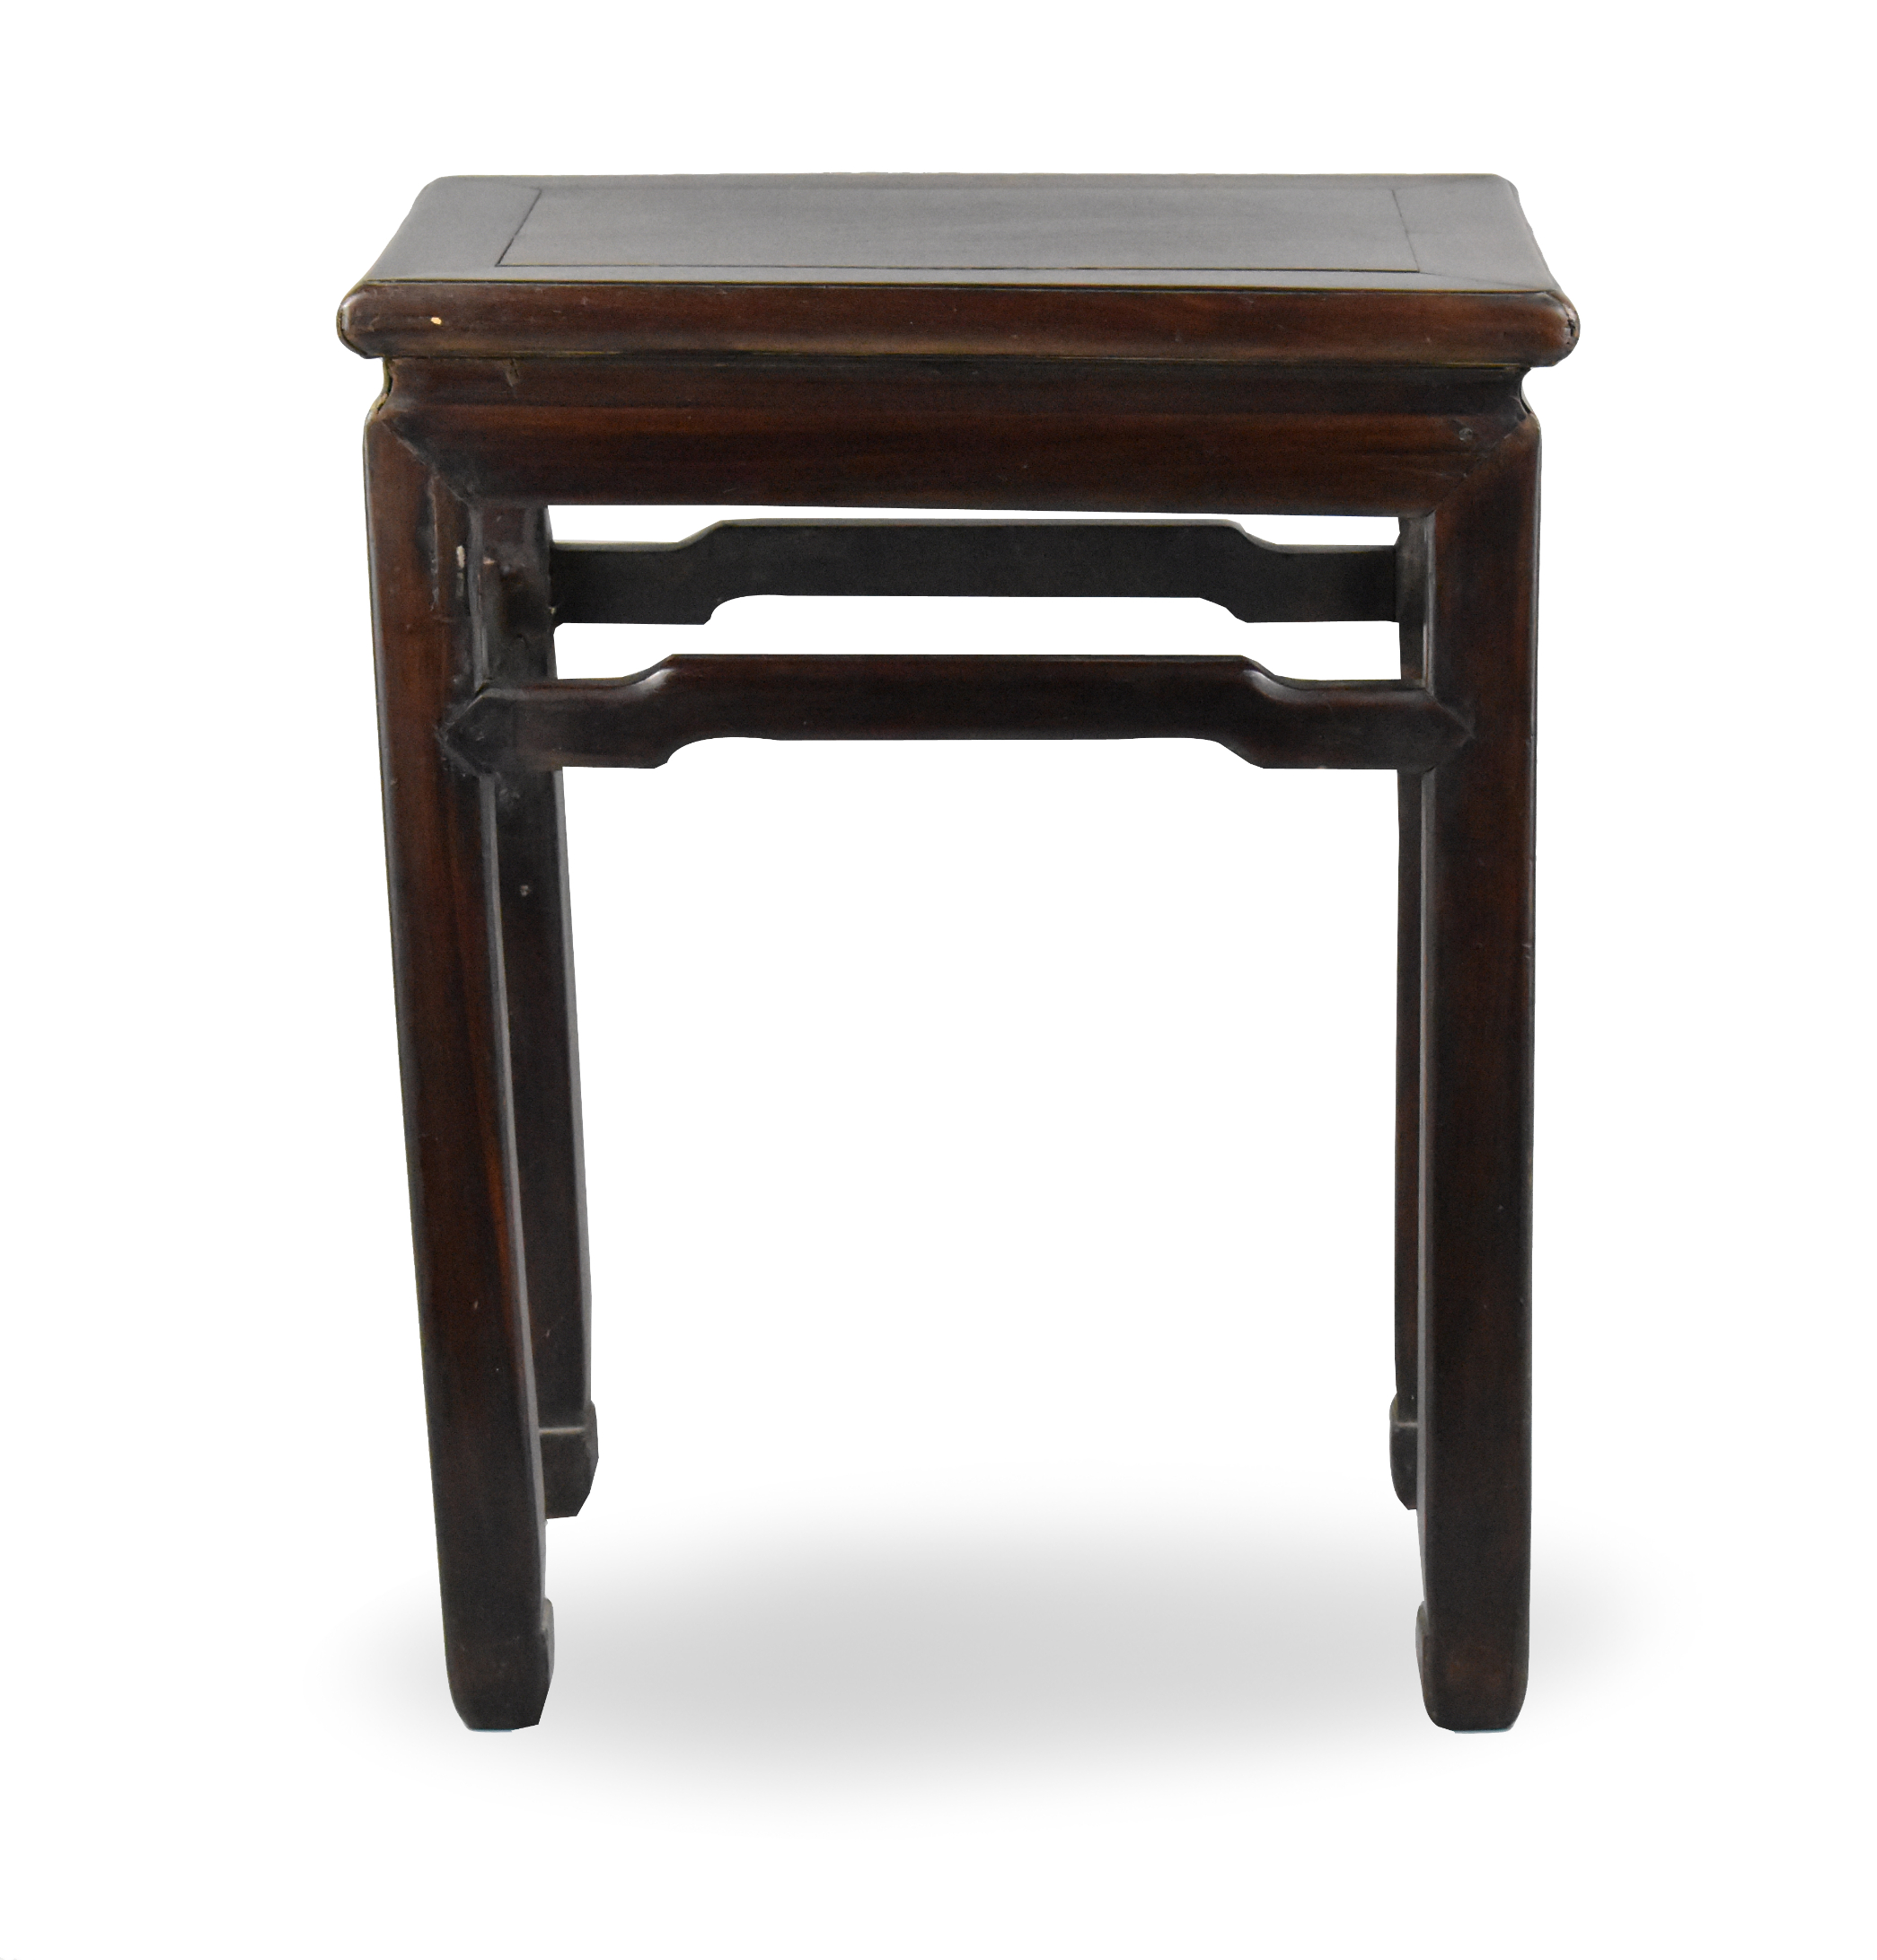 SMALL CHINESE HARDWOOD TABLE QING 33a113